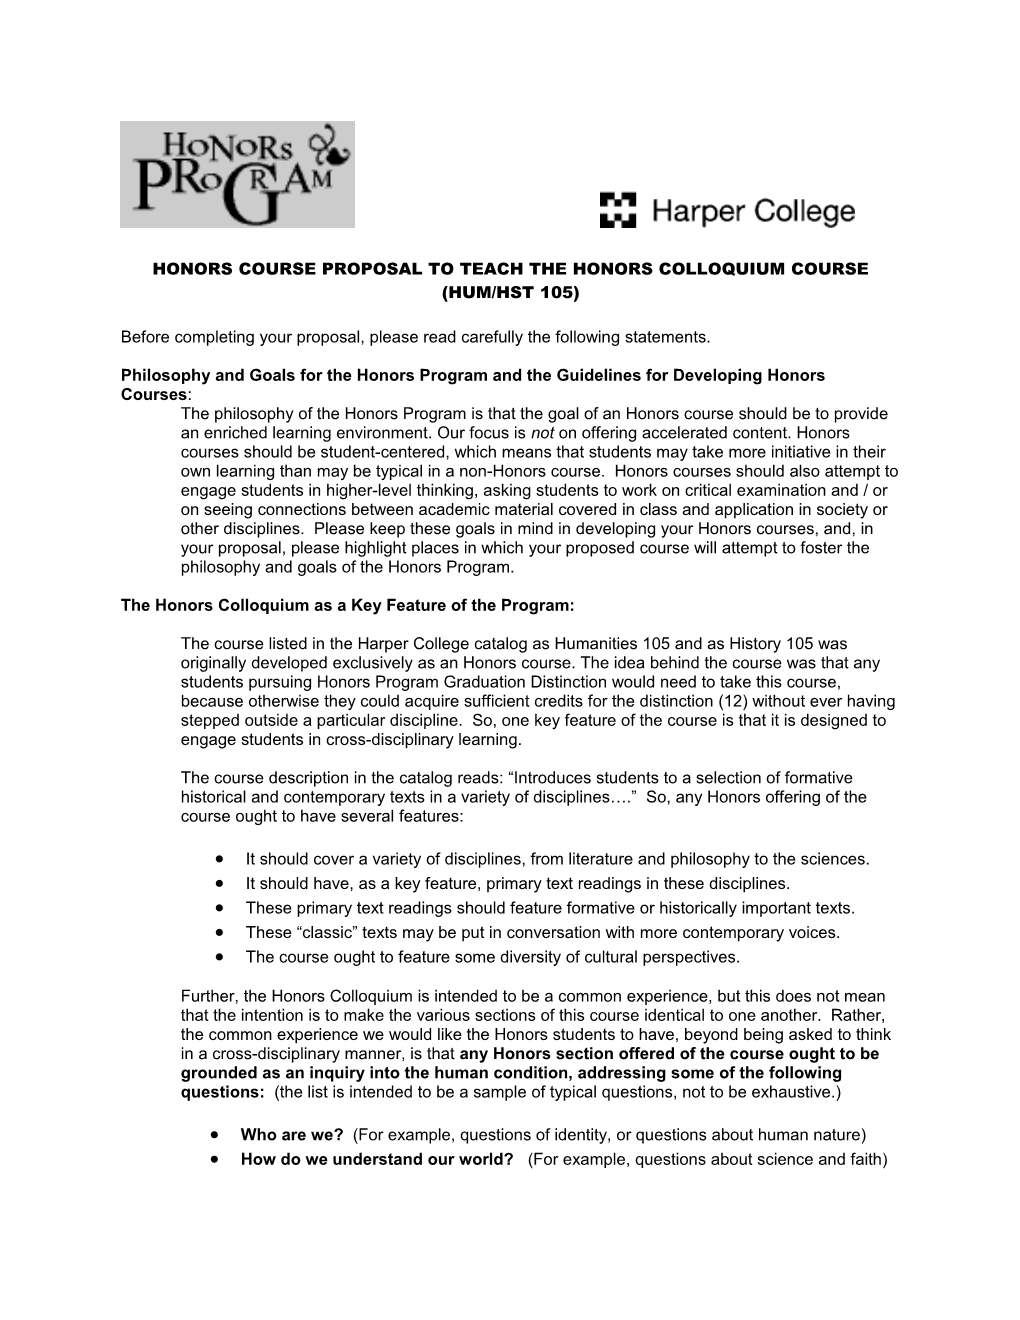 Honors Course Proposal to Teach the Honorscolloquium Course (Hum/Hst 105)